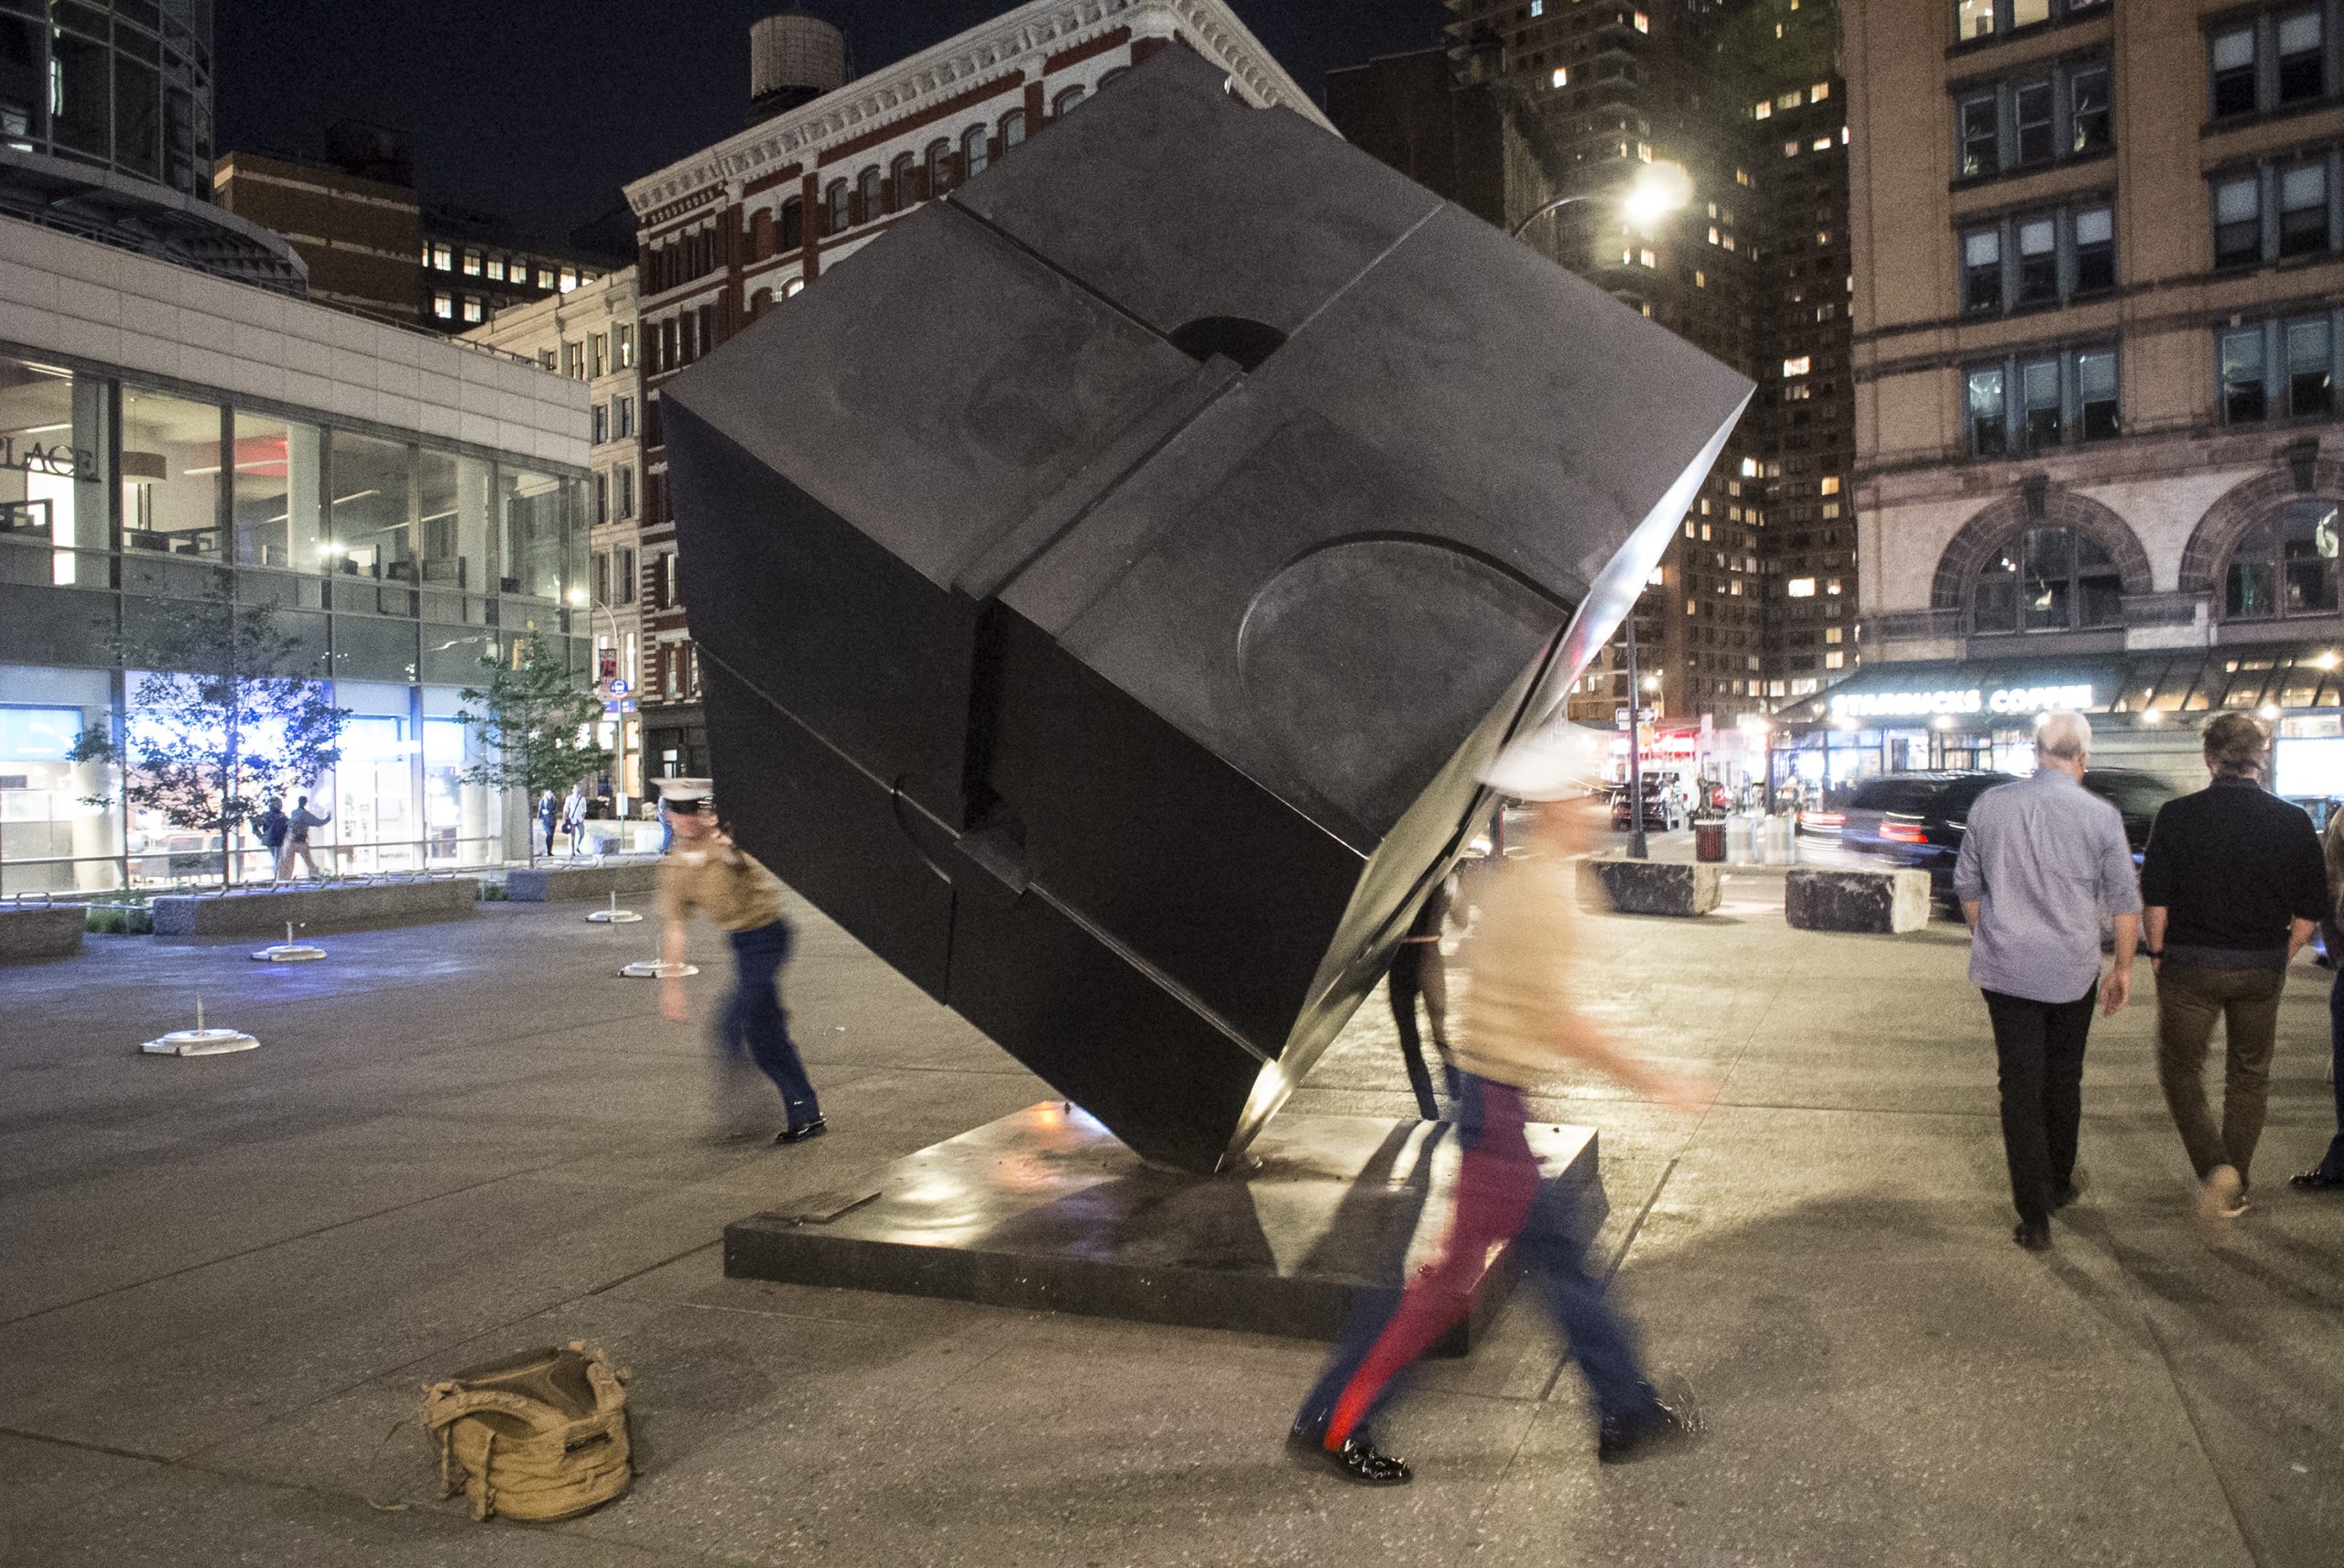 The Beloved Astor Place Cube Returns! Finally